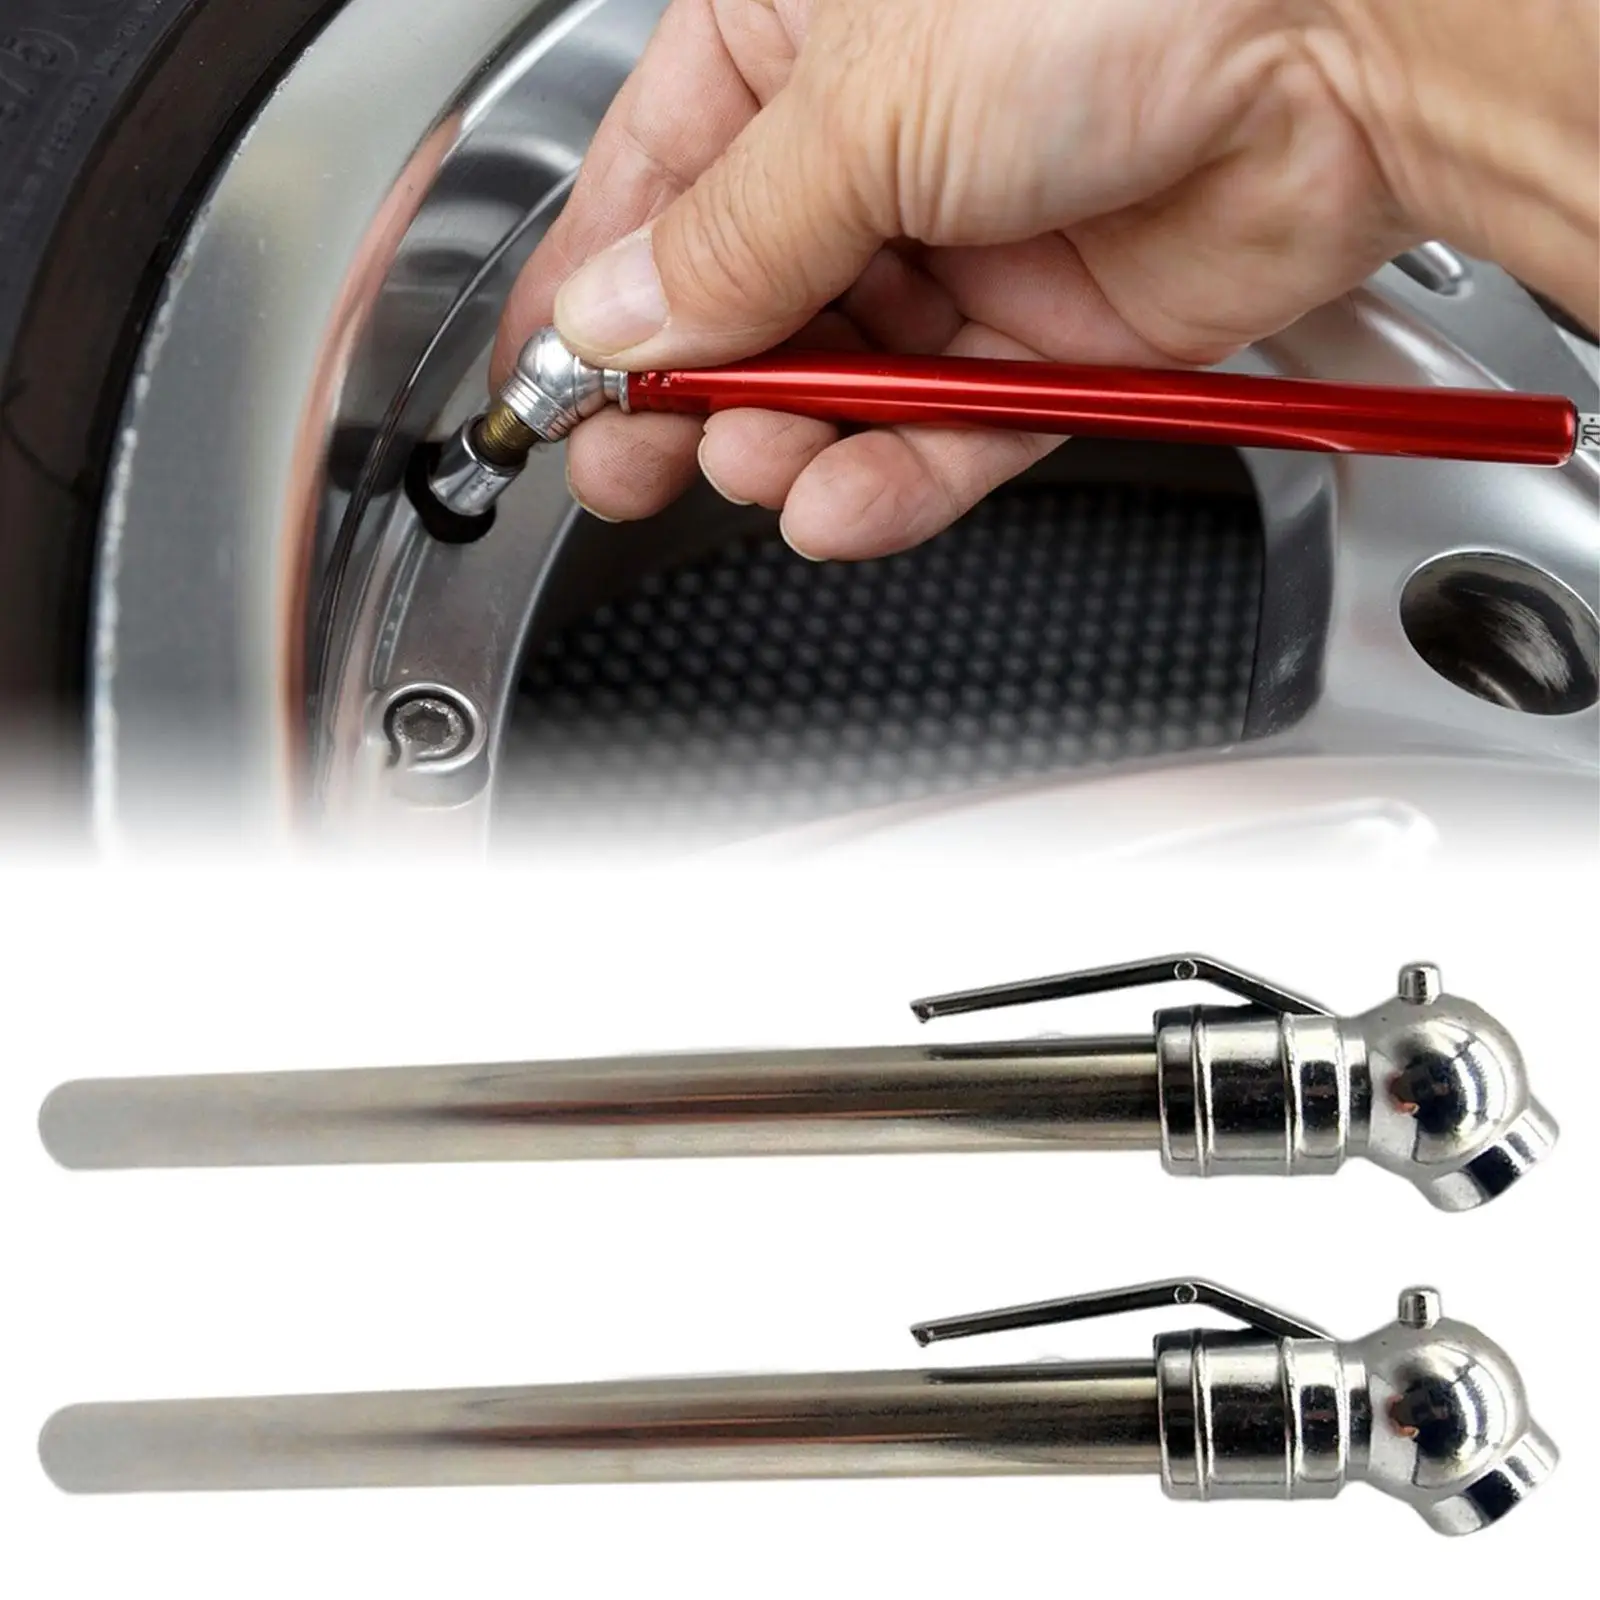 2Pcs Pencil Tire Pressure Gauge Stainless Steel Body for Bicycles Trucks Car